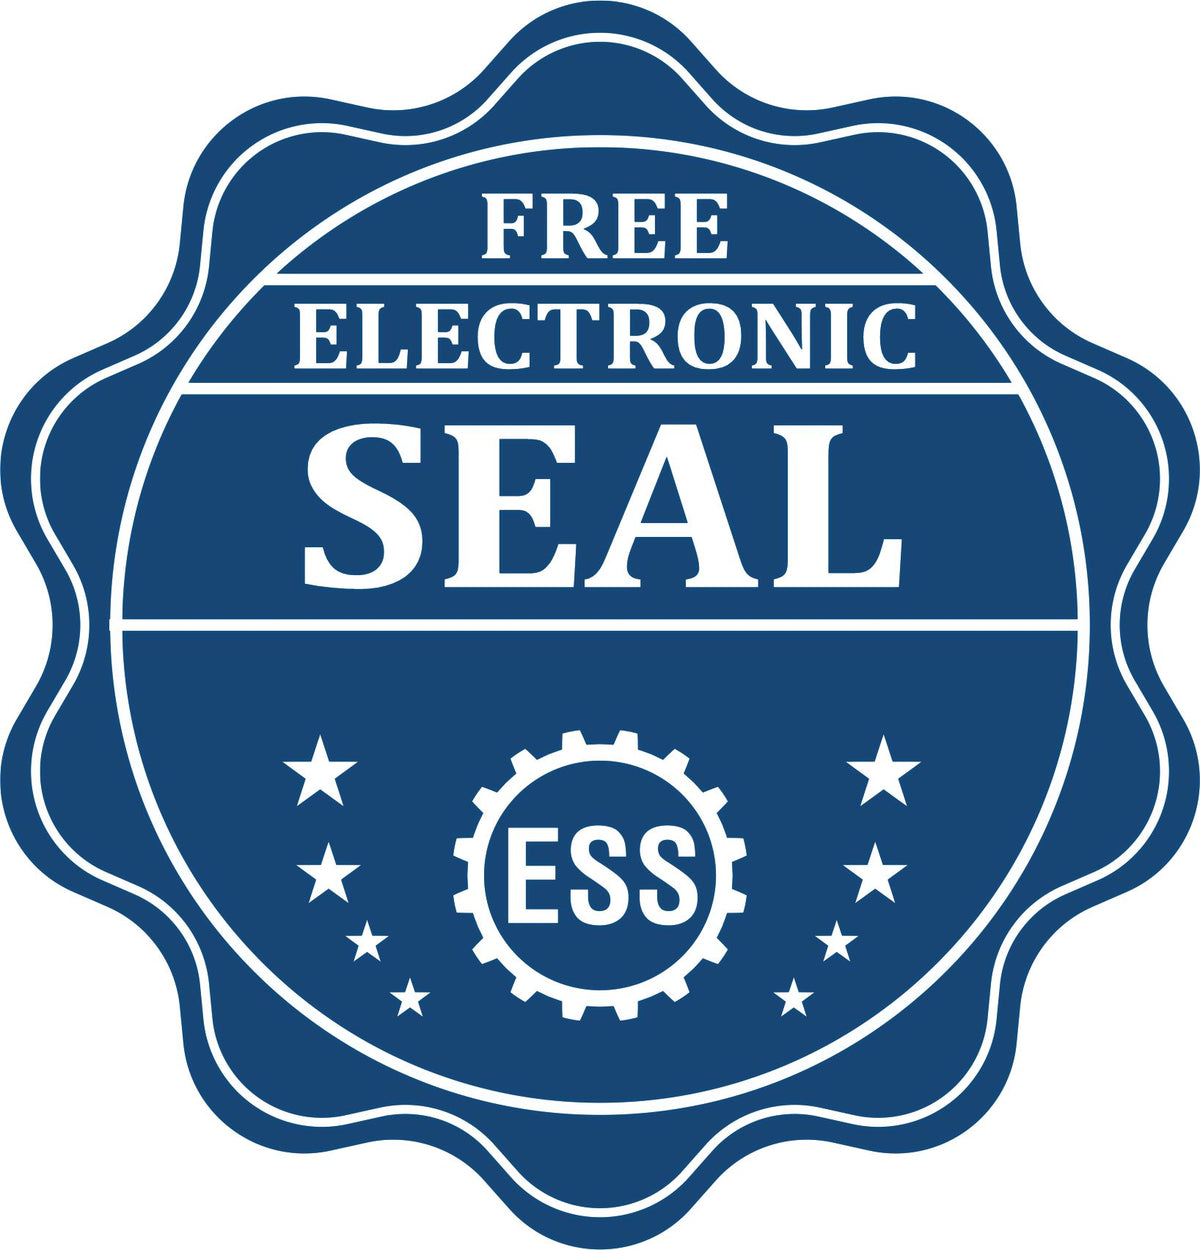 A badge showing a free electronic seal for the Florida Engineer Desk Seal with stars and the ESS gear on the emblem.